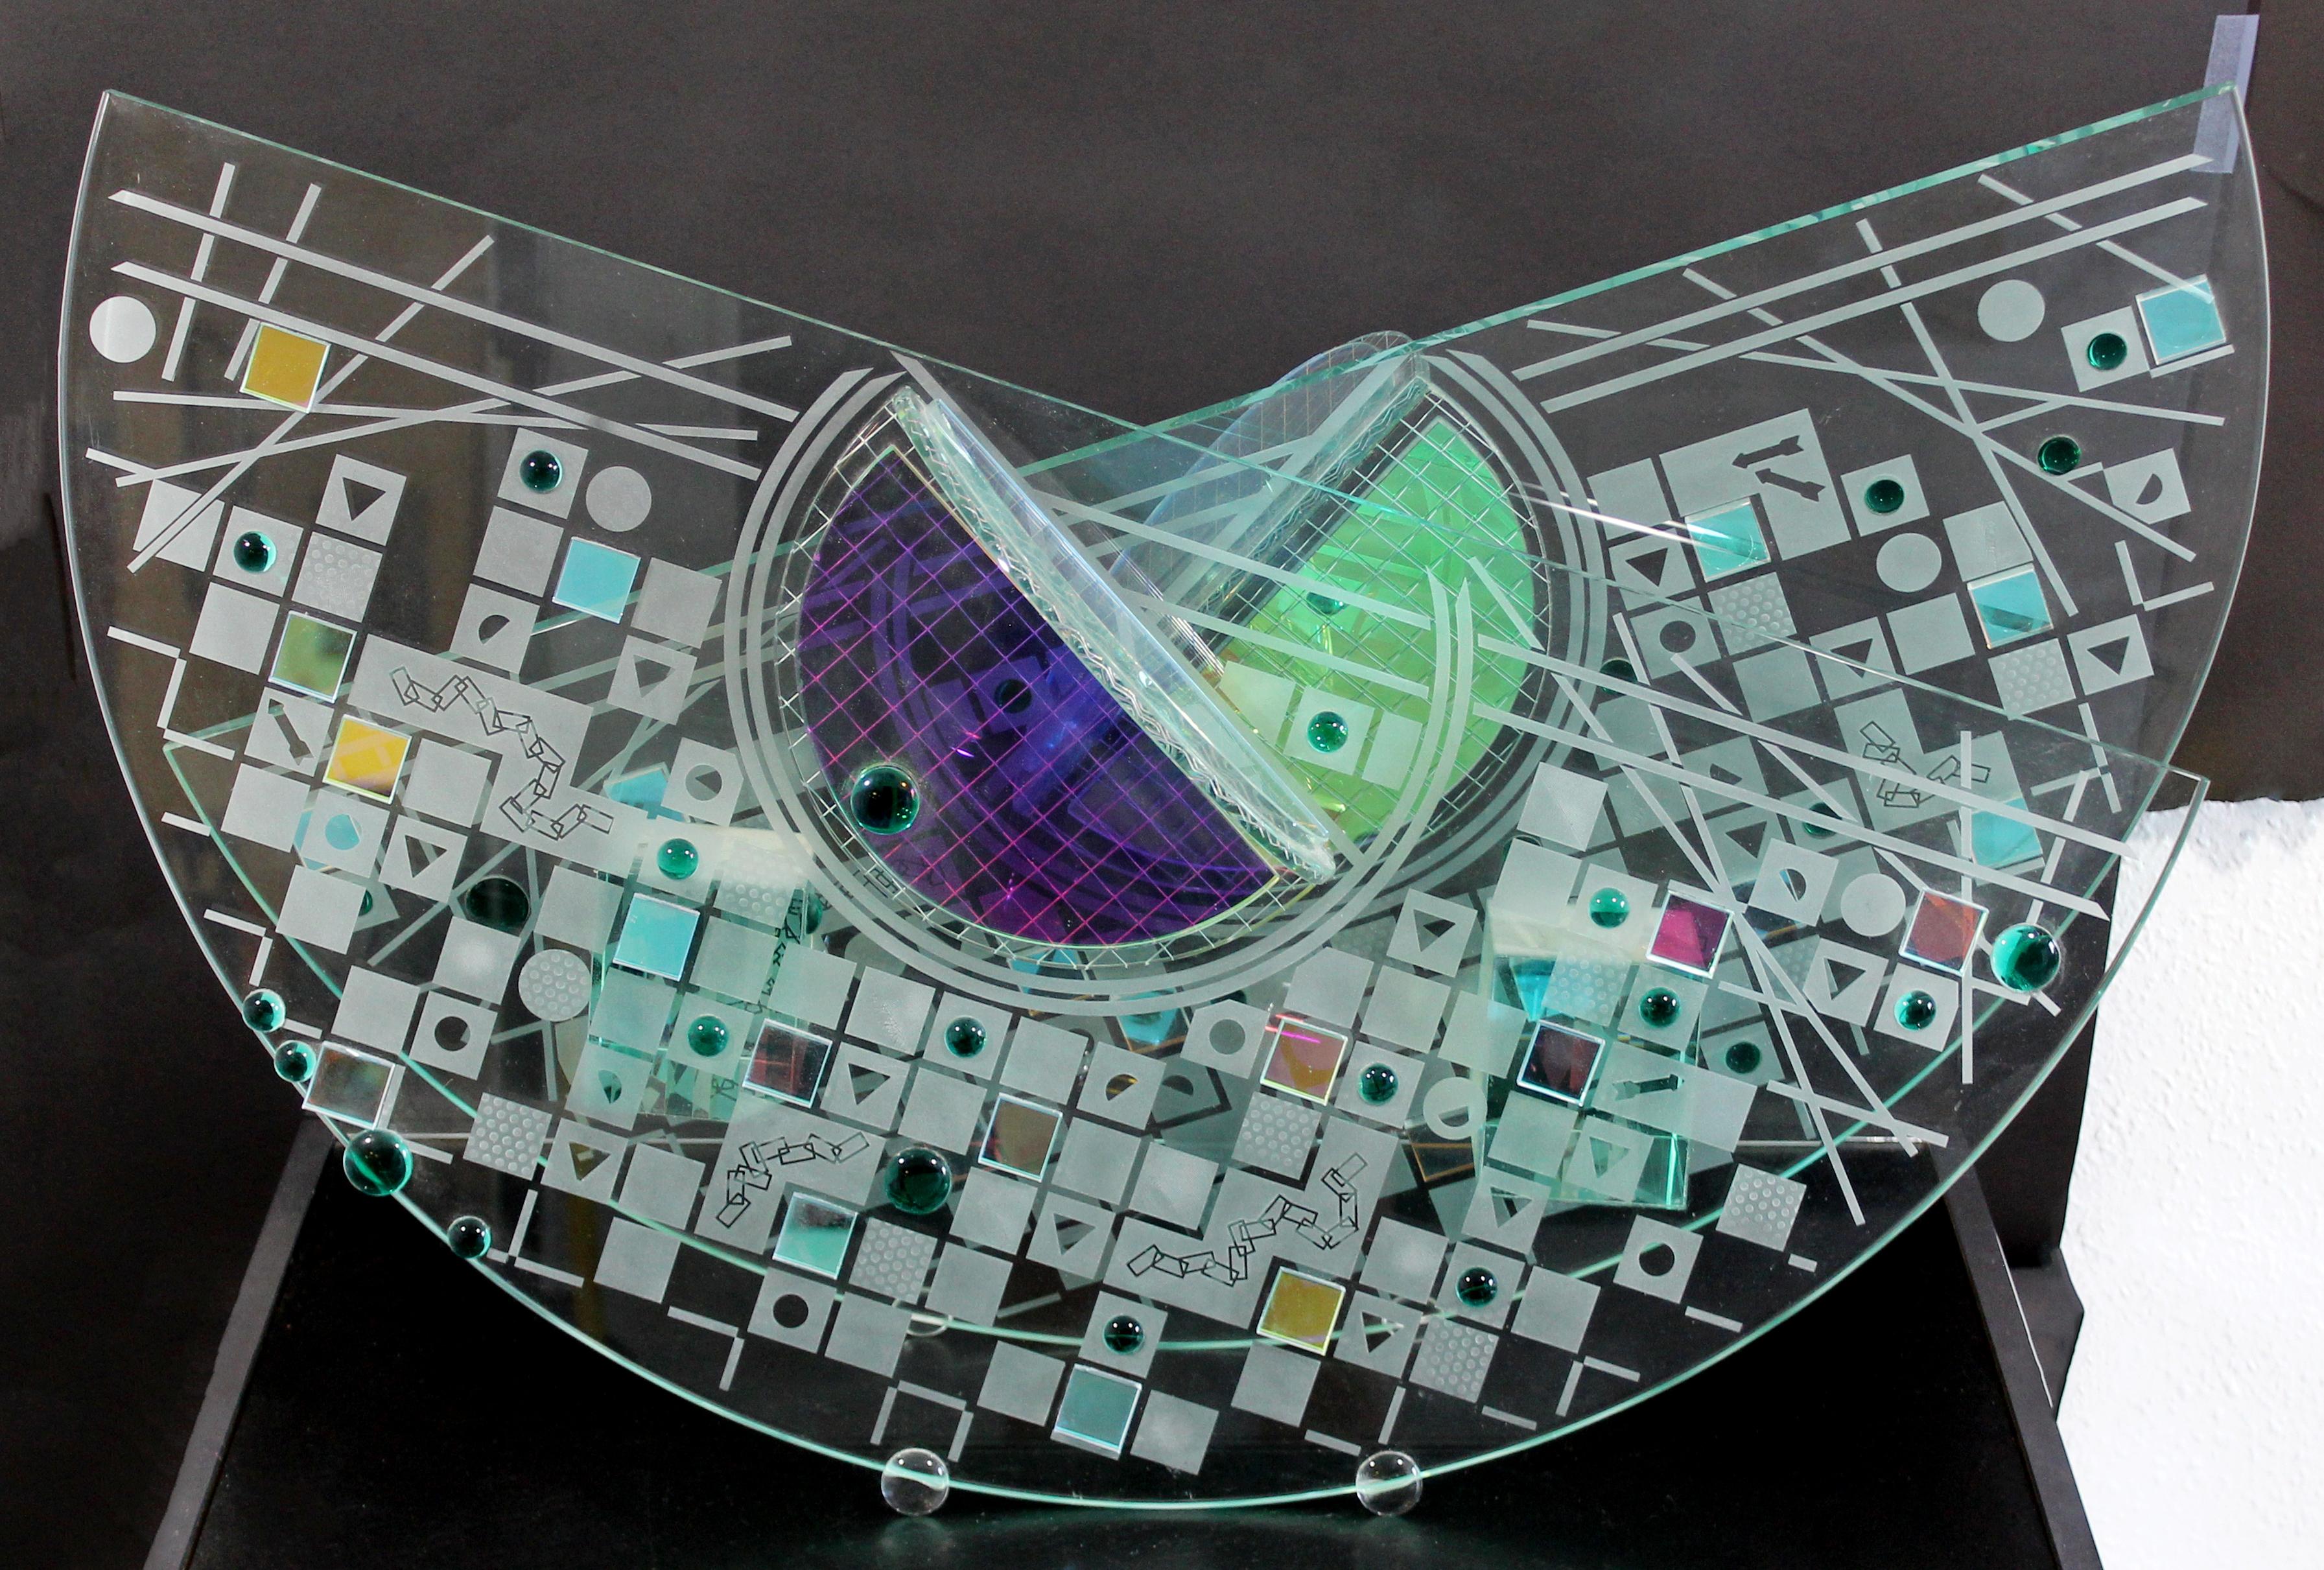 For your consideration is a luminescent, abstract glass table sculpture in the Memphis style, circa the 1980s. By renowned glass artist Toland Sands. In excellent condition. The dimensions are 30